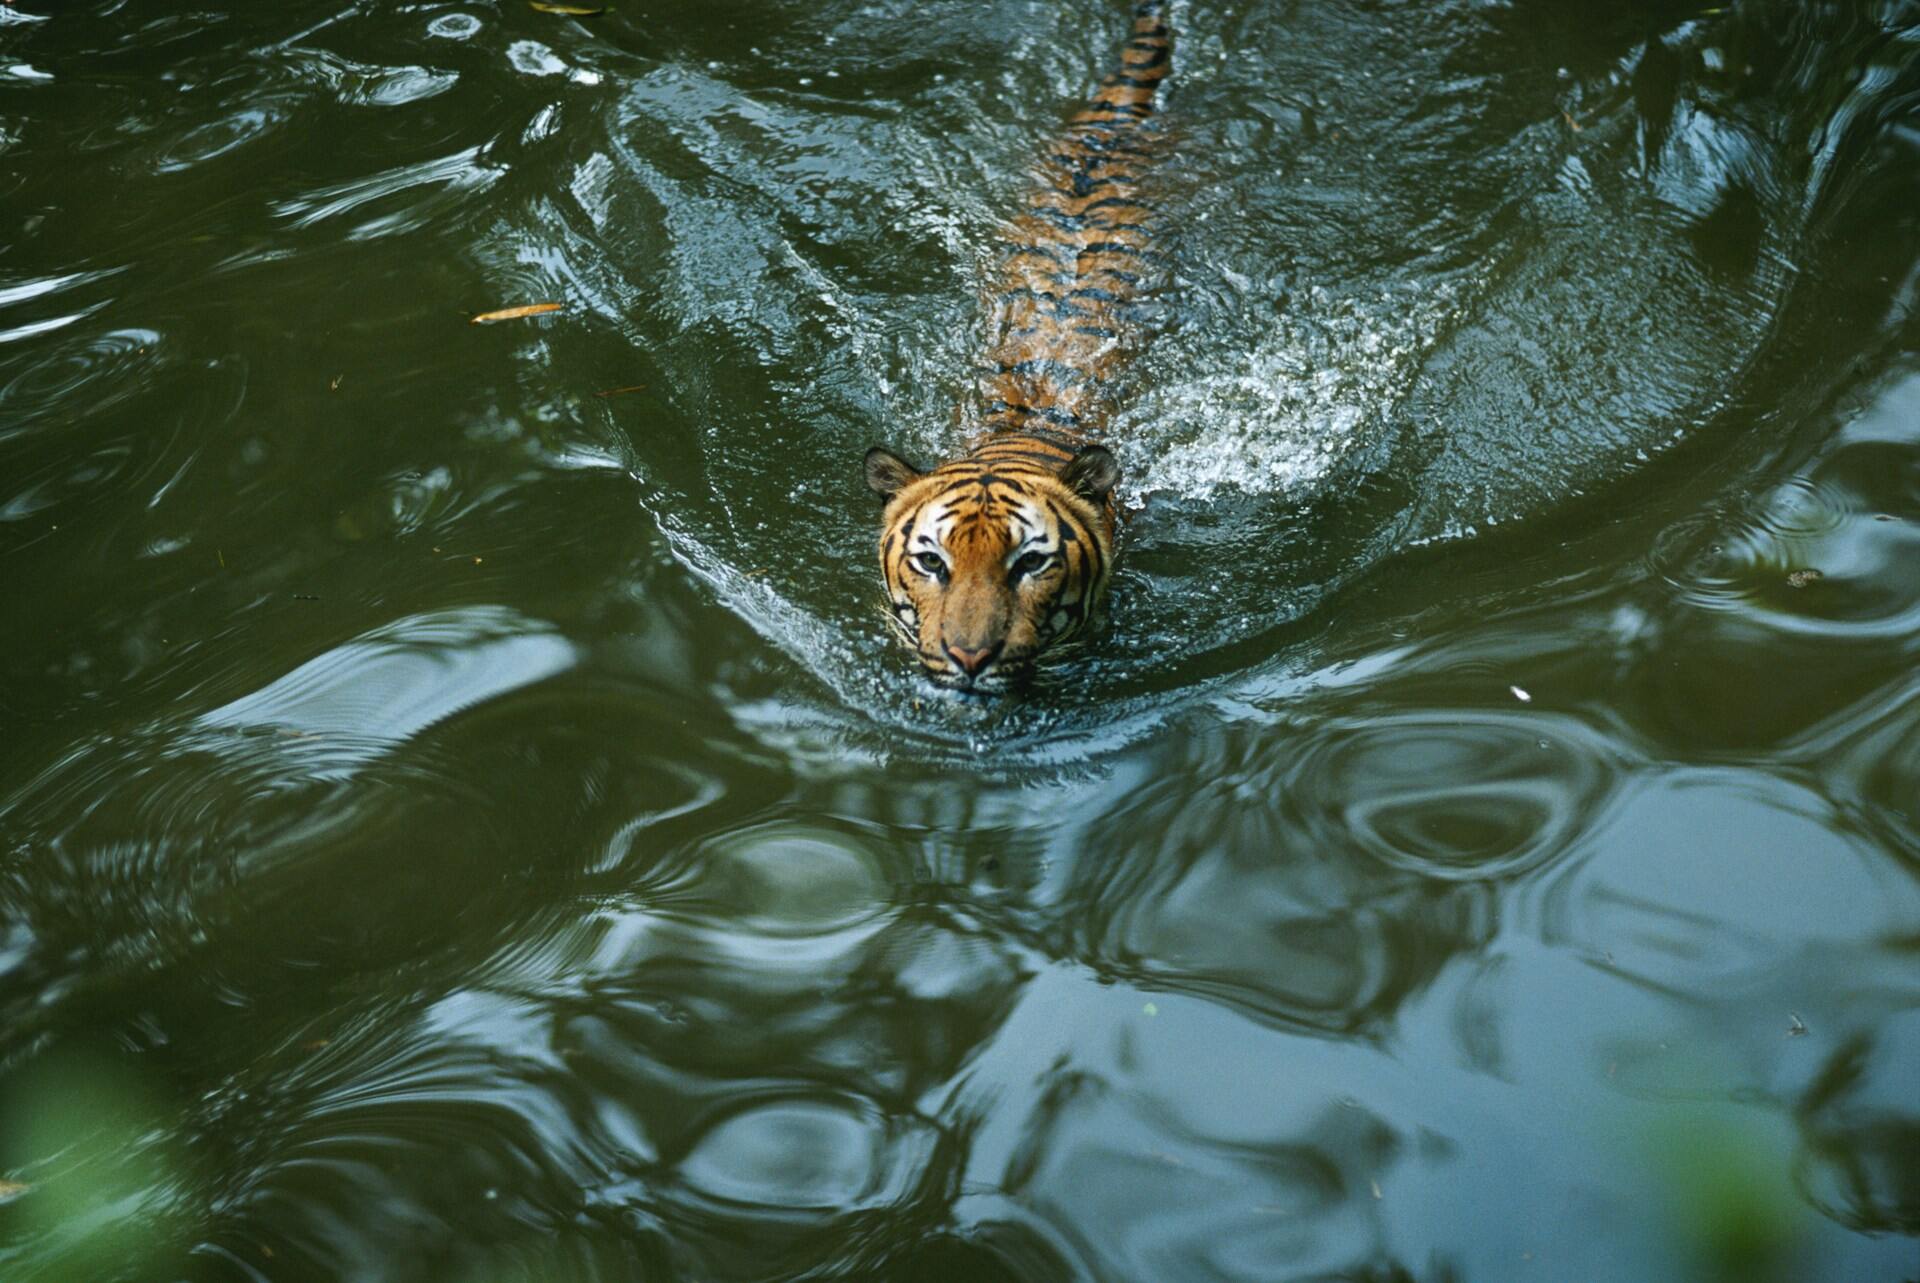 A tiger swimming through the water in a lake